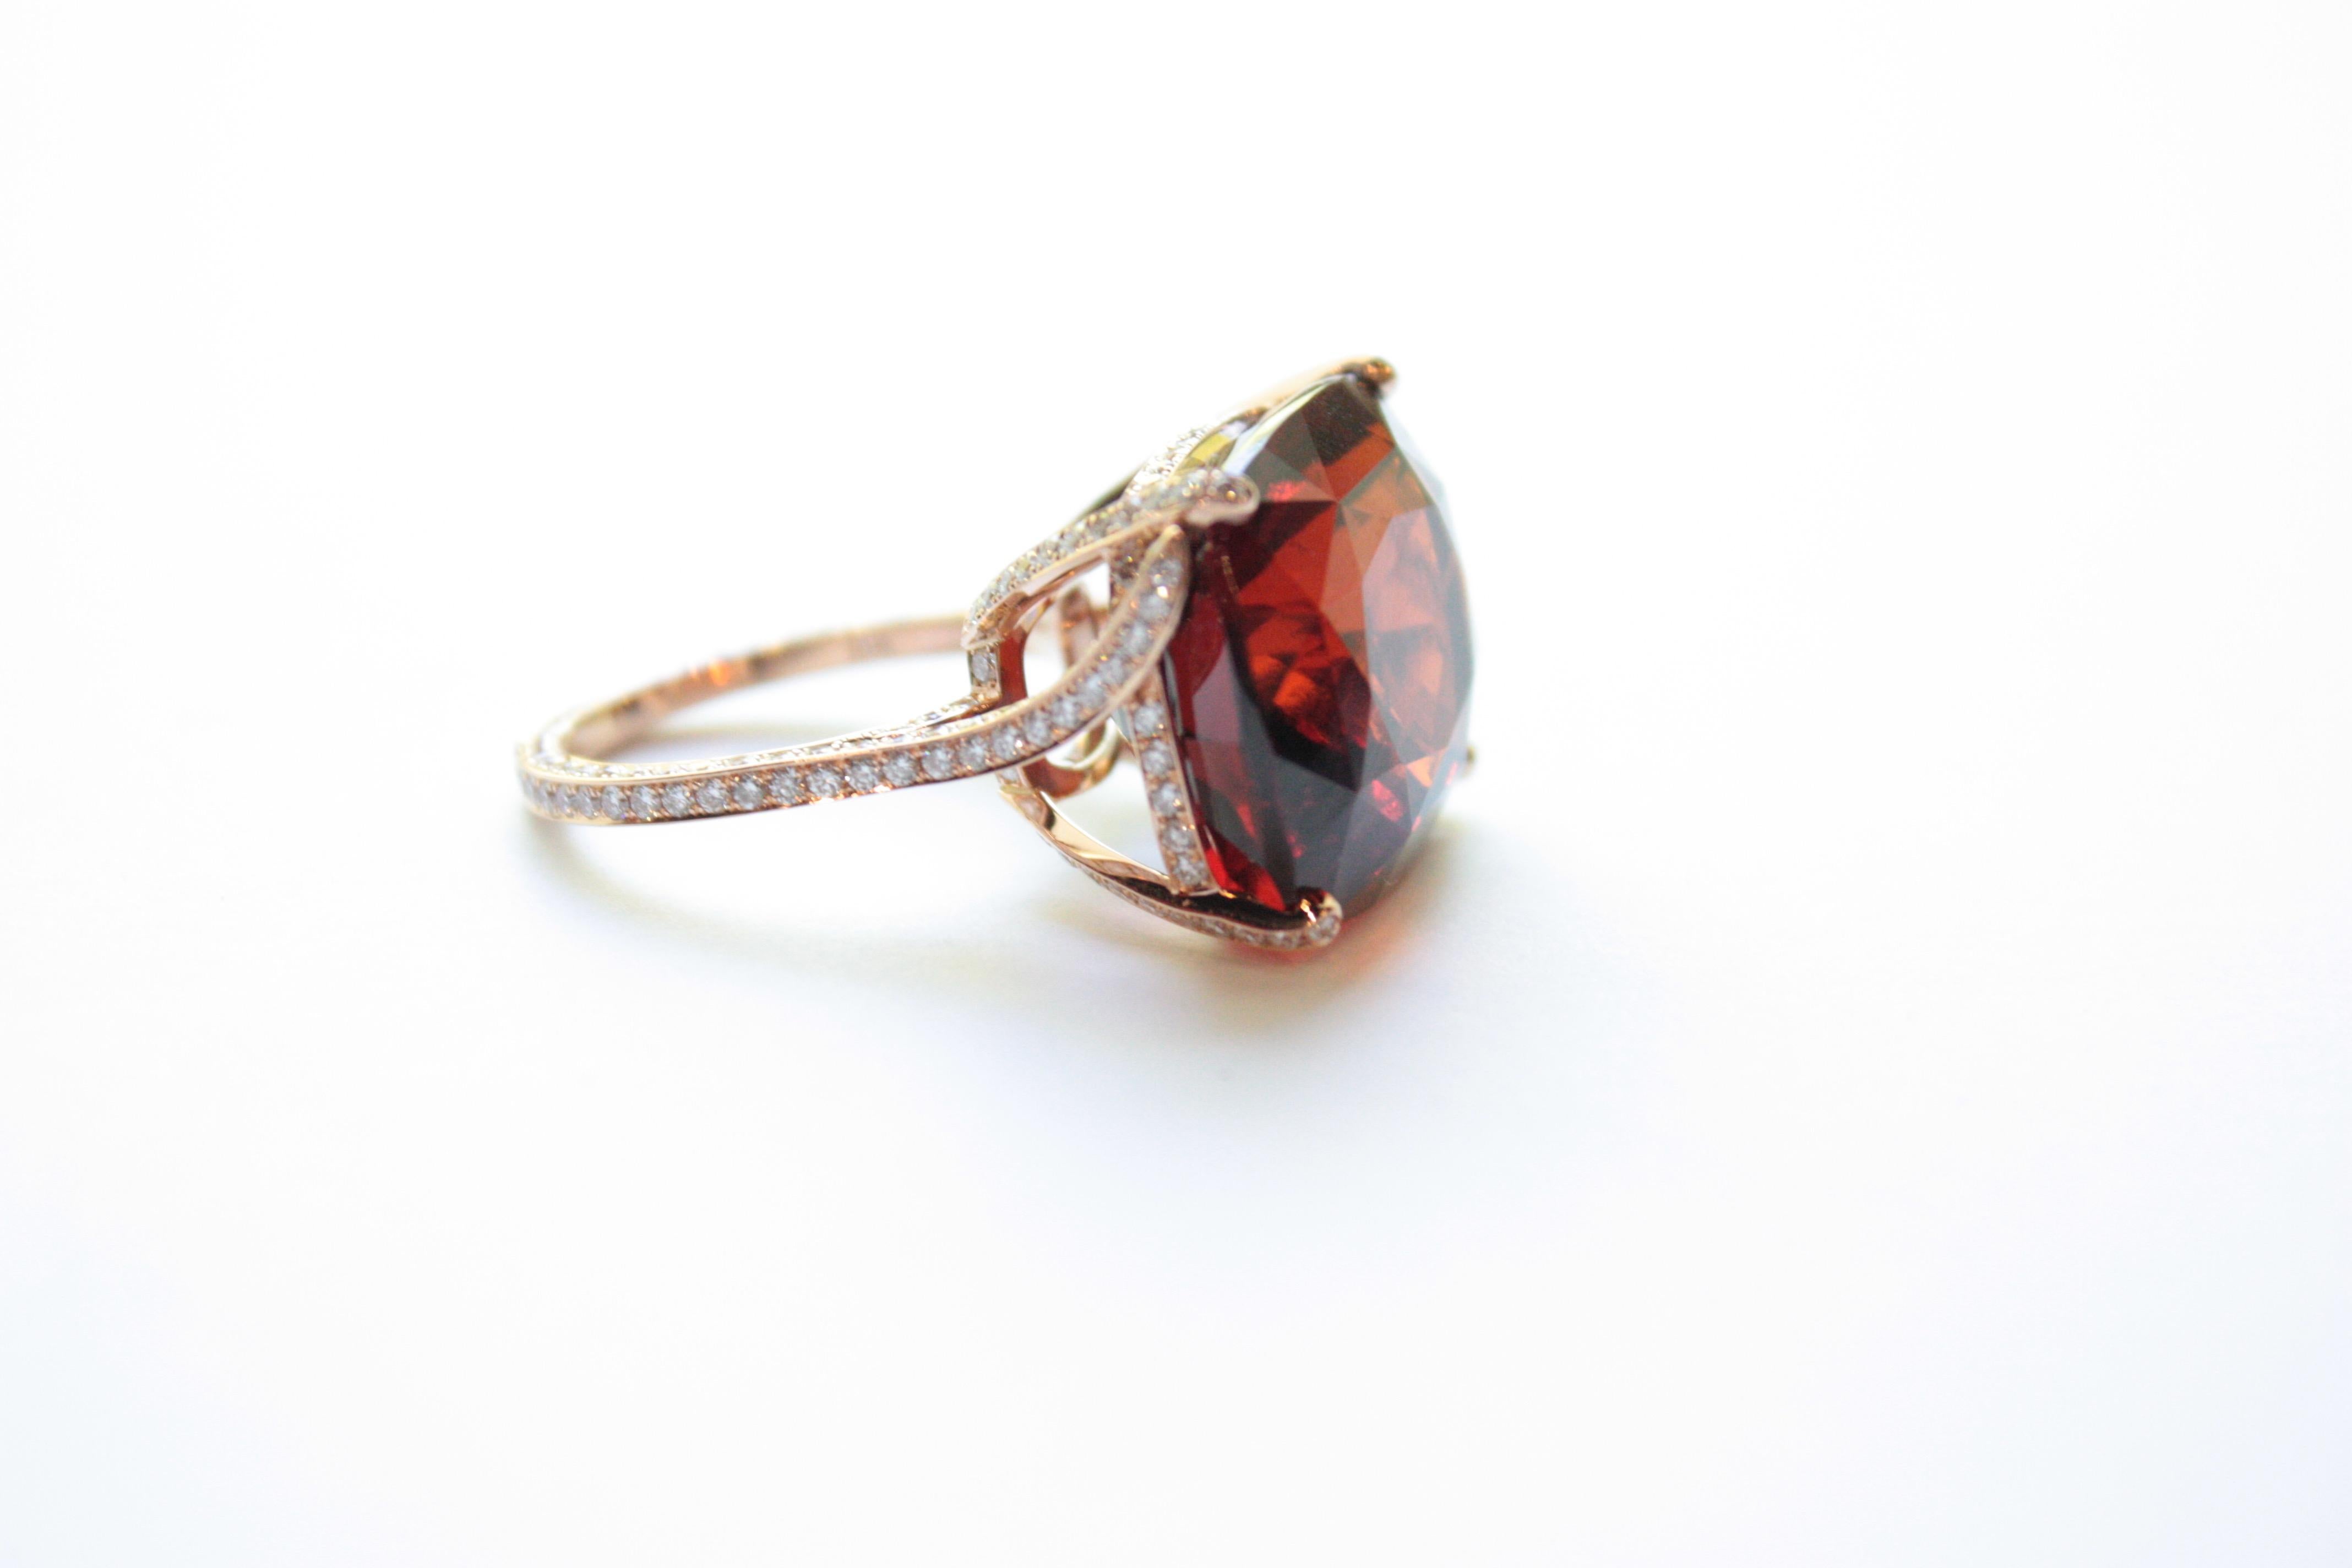 Garnet Big Ring
A twenty-karat rose gold ring showcasing a large 28.86 carat garnet.  The entire shank, leading up to and holding the center stone in place, has been encrusted on all three sides in white diamonds. 
Size 6 - adjustable upon request